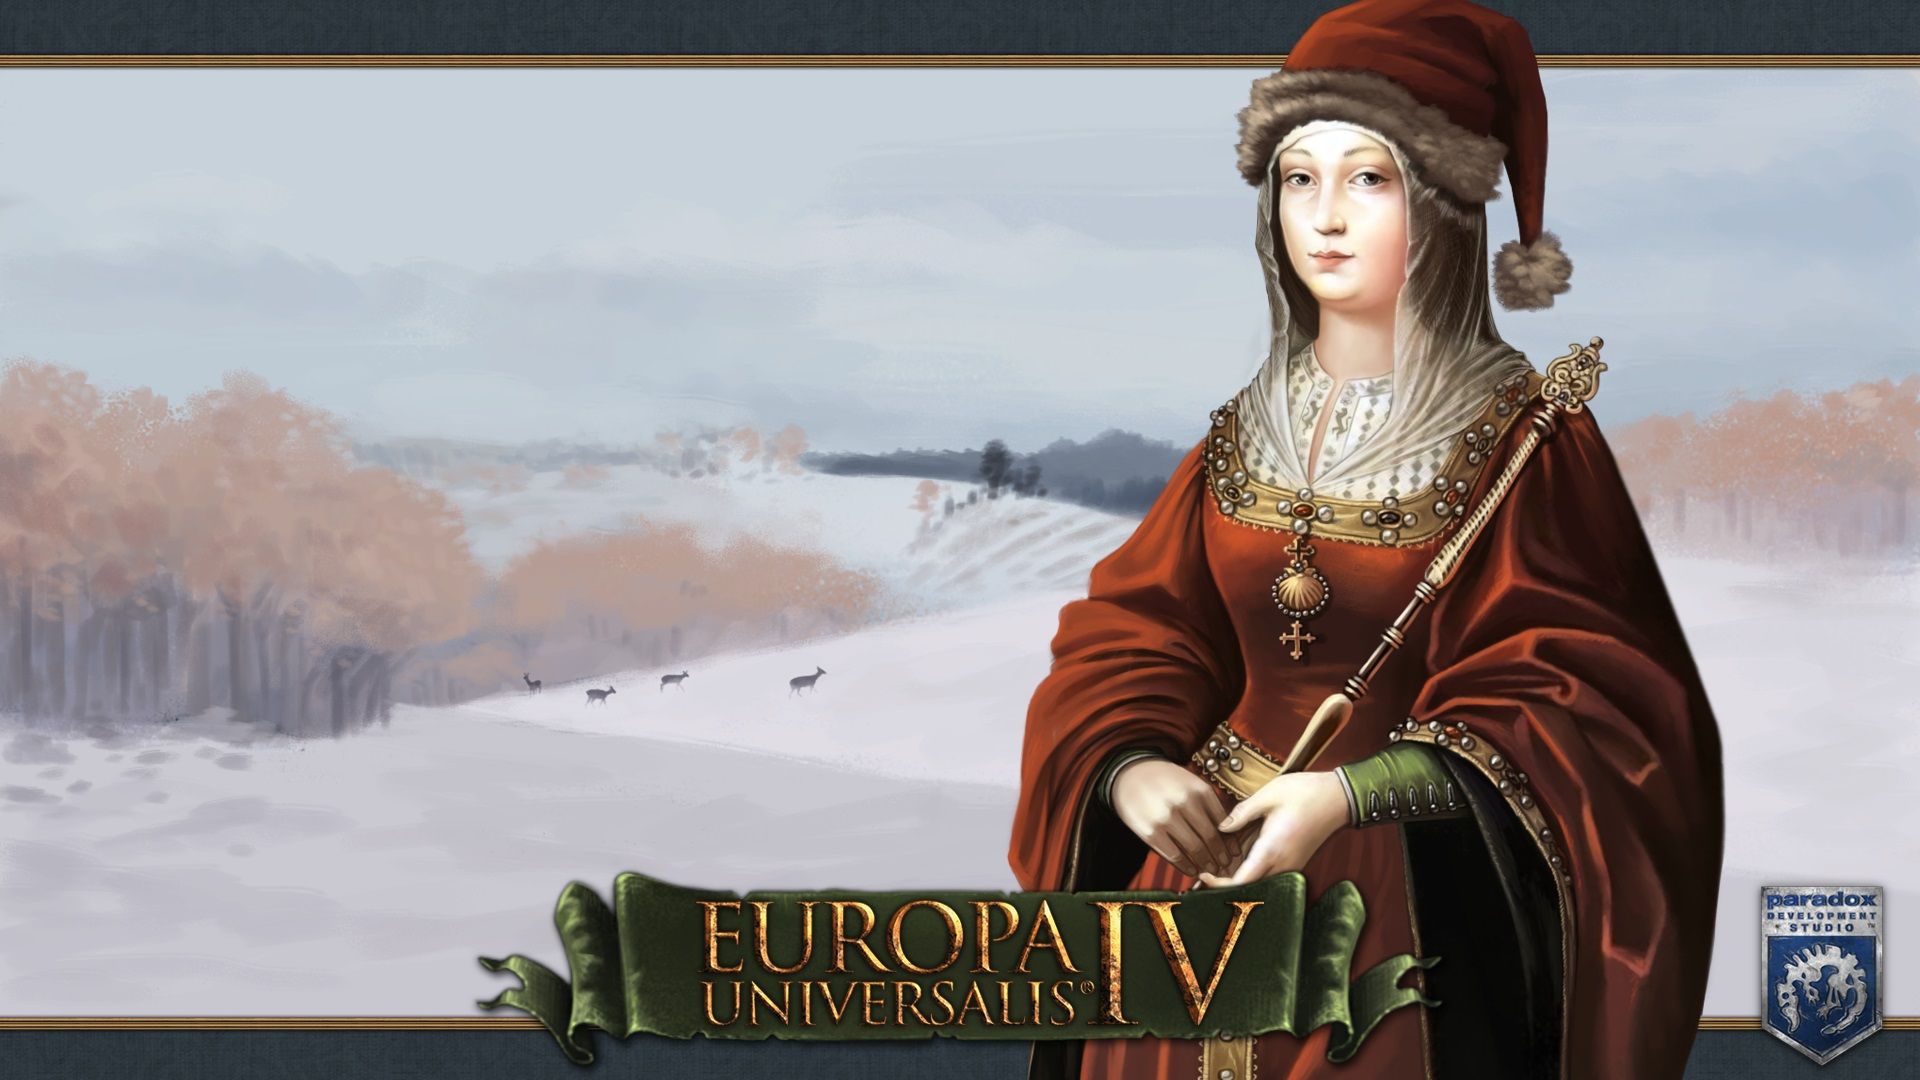 Who Is This? EU4 Wallpaper Loading Screen?